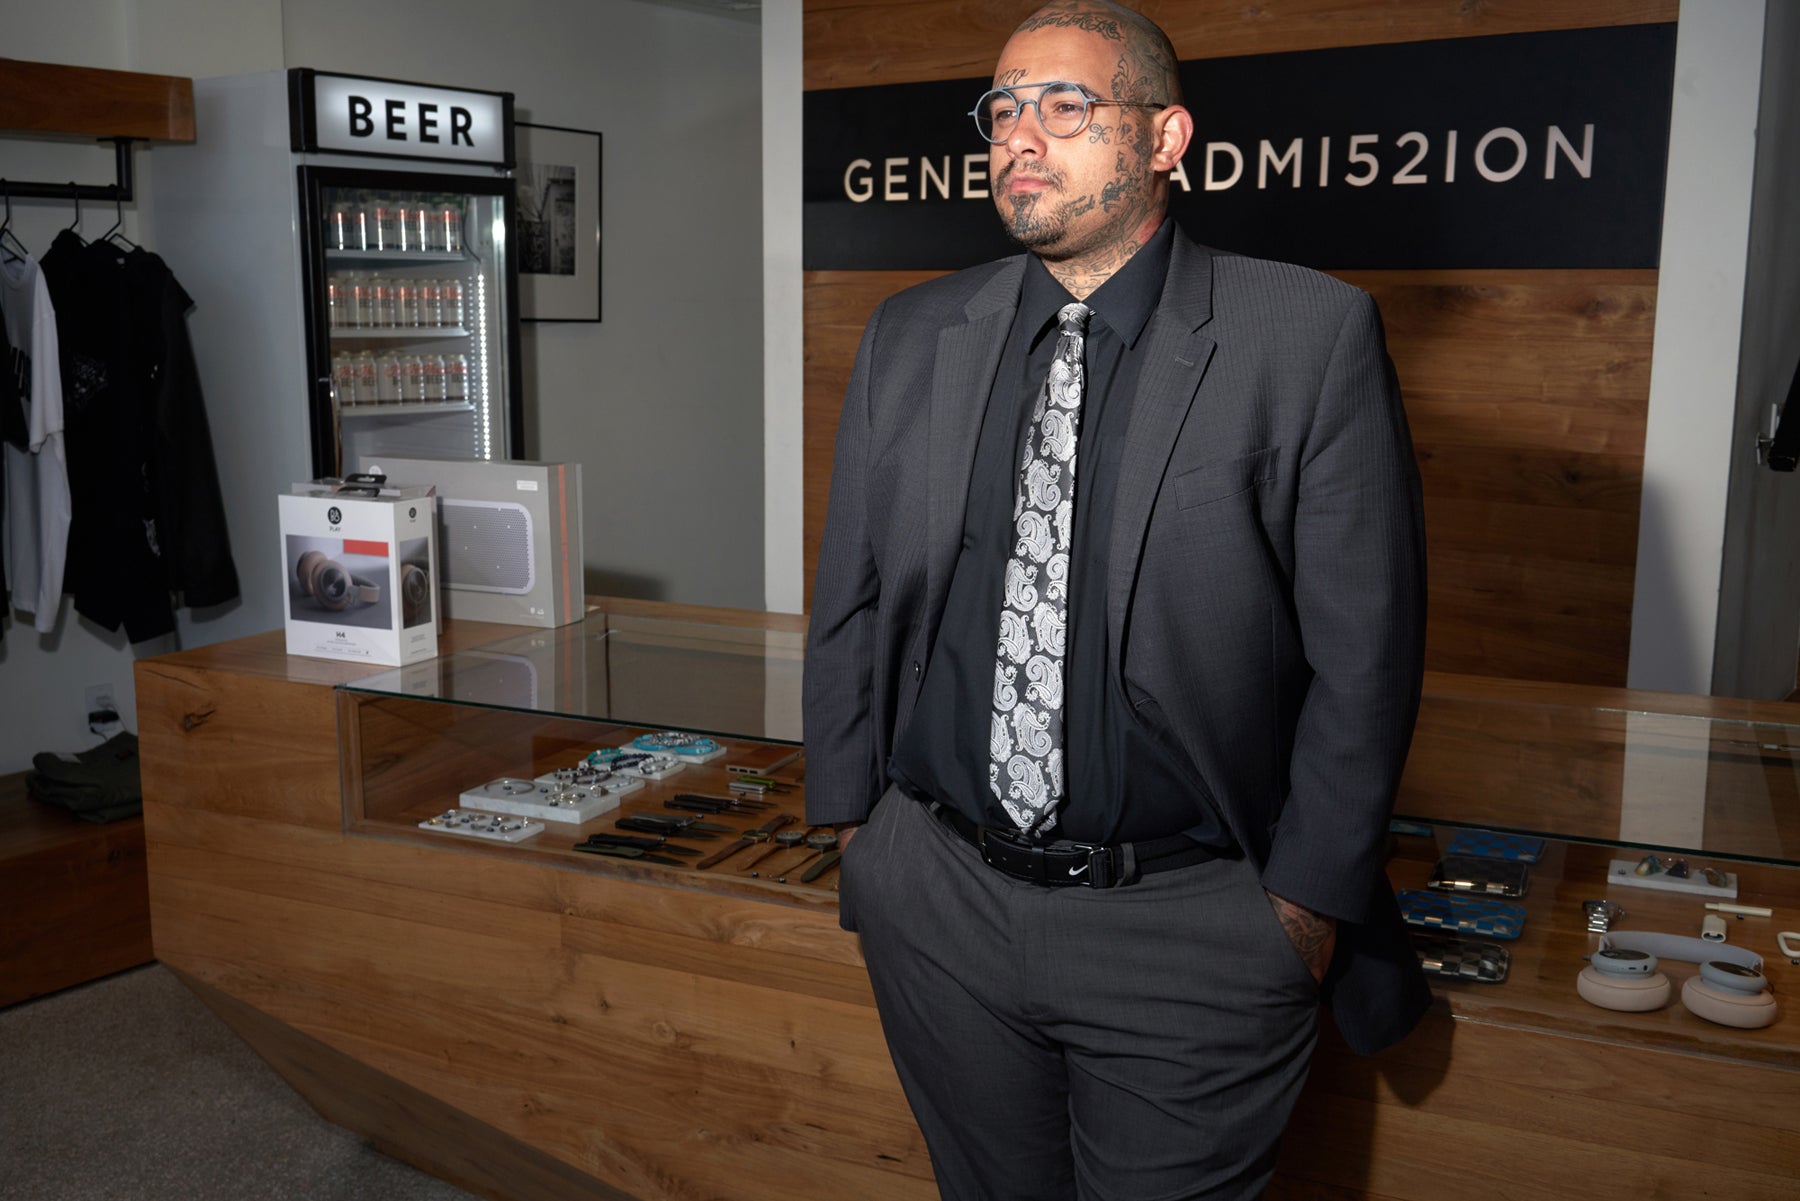 Raul Guzman owner of barber shop Svelte, standing in front of the General Admission cash desk in Venice, California.